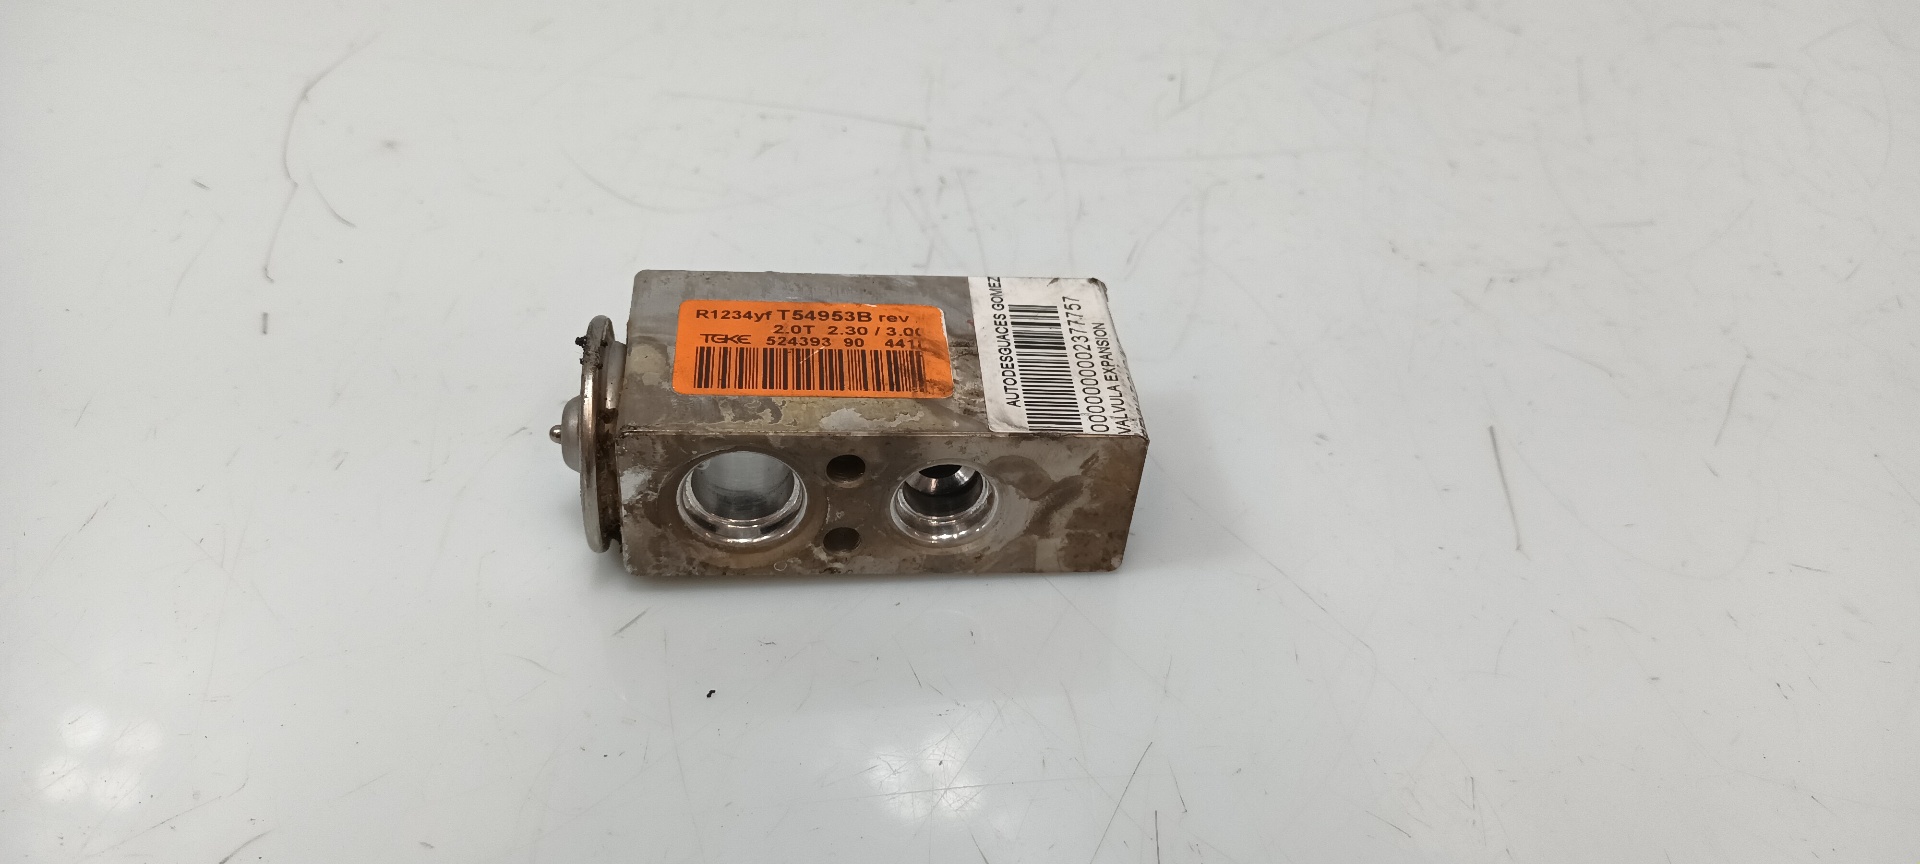 RENAULT Clio 4 generation (2012-2020) Other Engine Compartment Parts T54953B 25349955